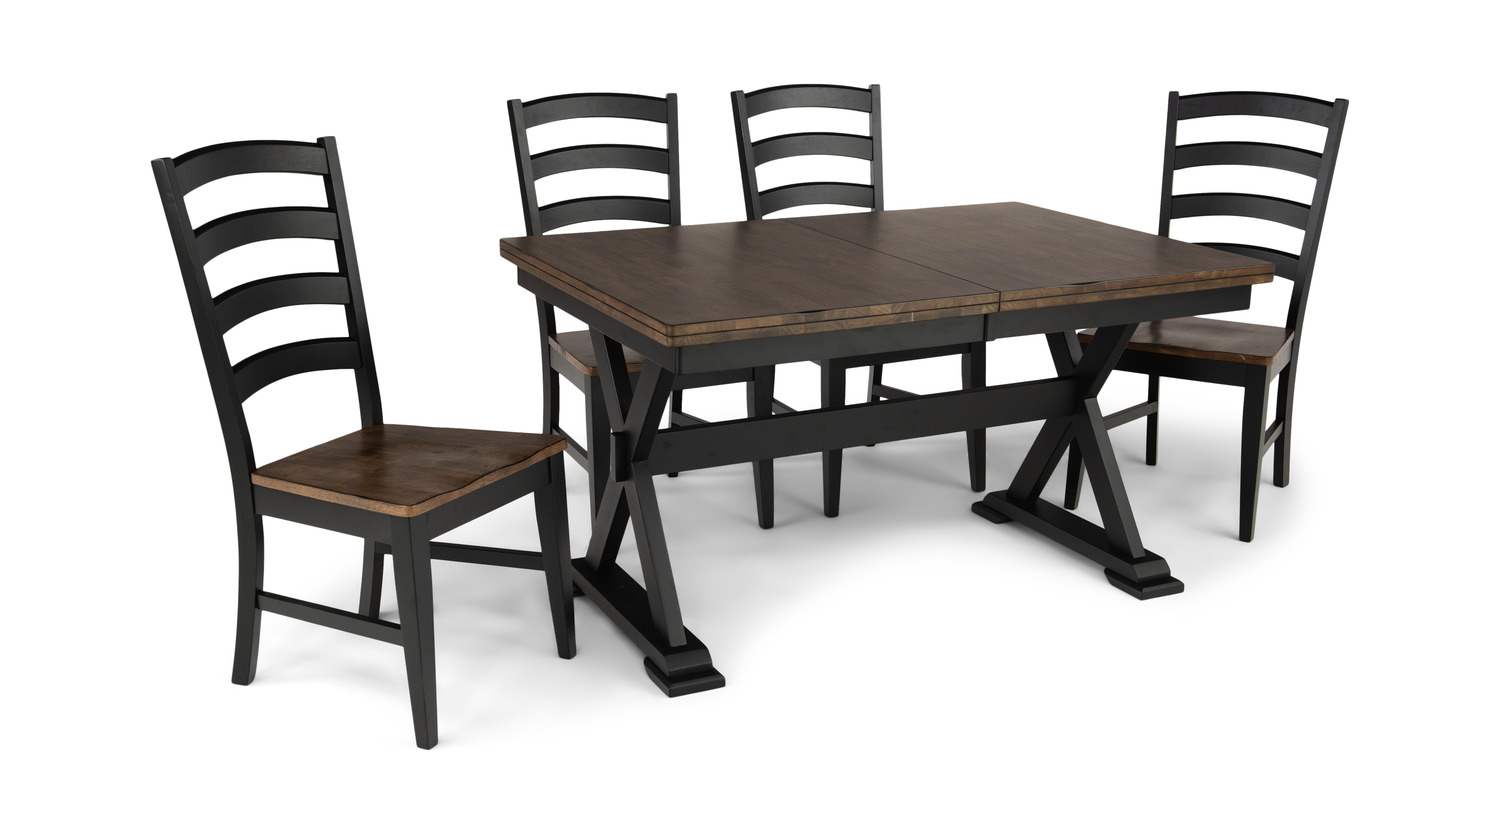 Greeley Square Trestle Table With 4 Ladderback Chairs